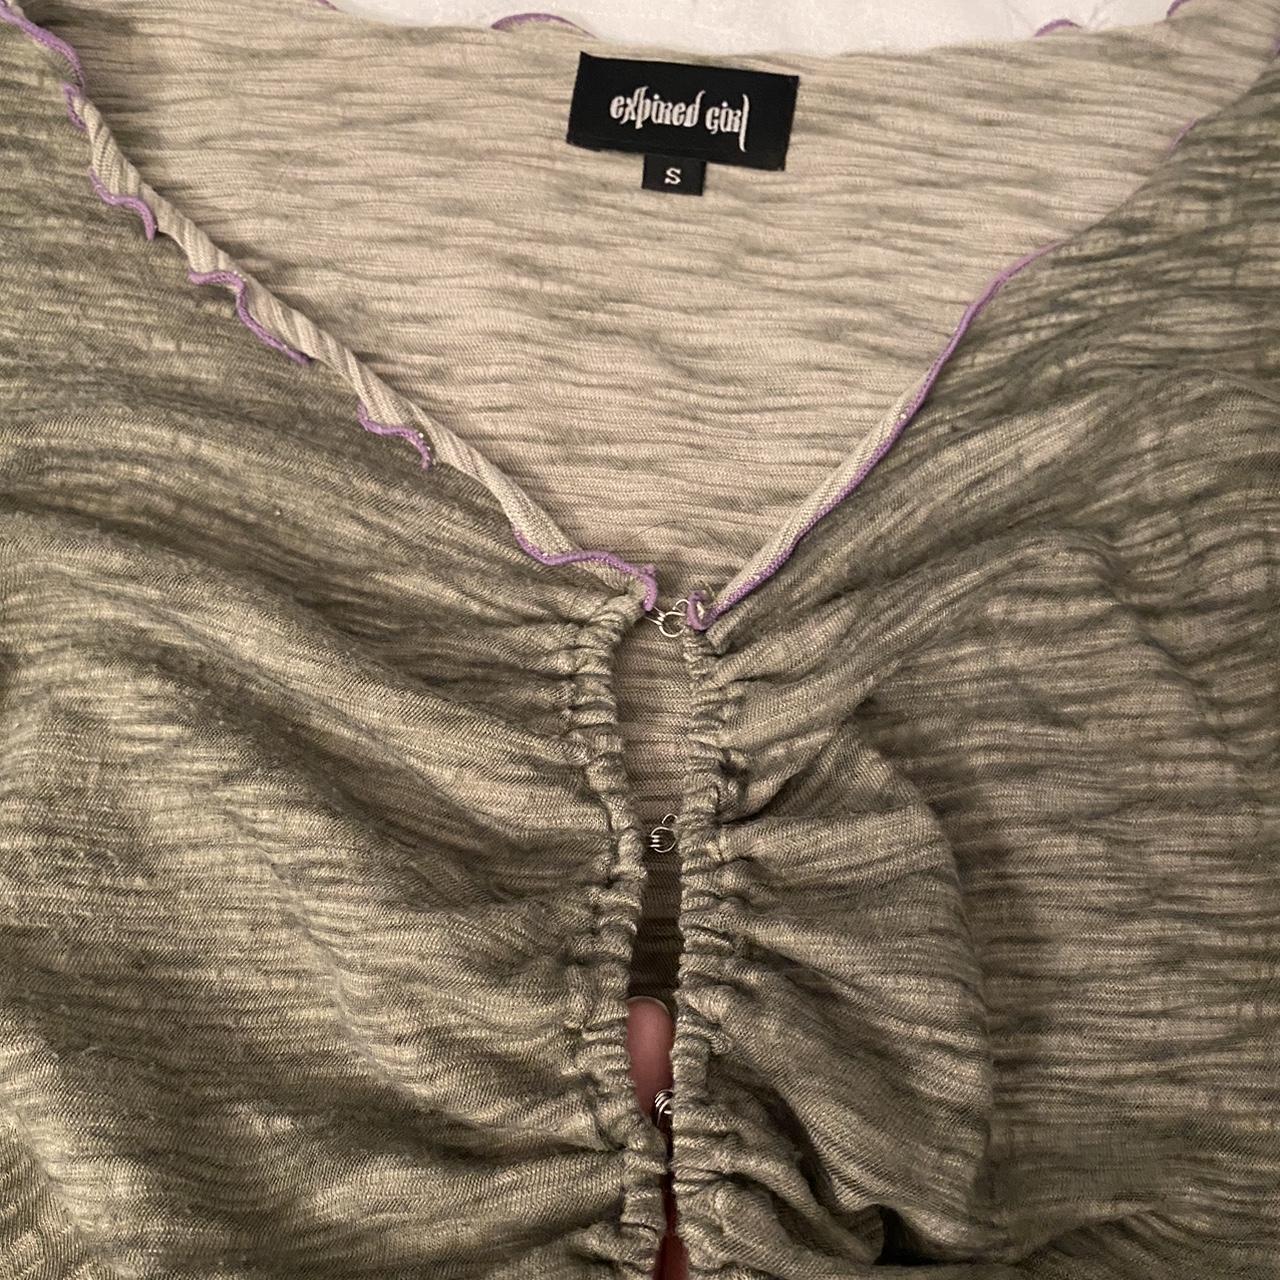 Product Image 4 - THIS EXPIRED GIRL TOP THAT